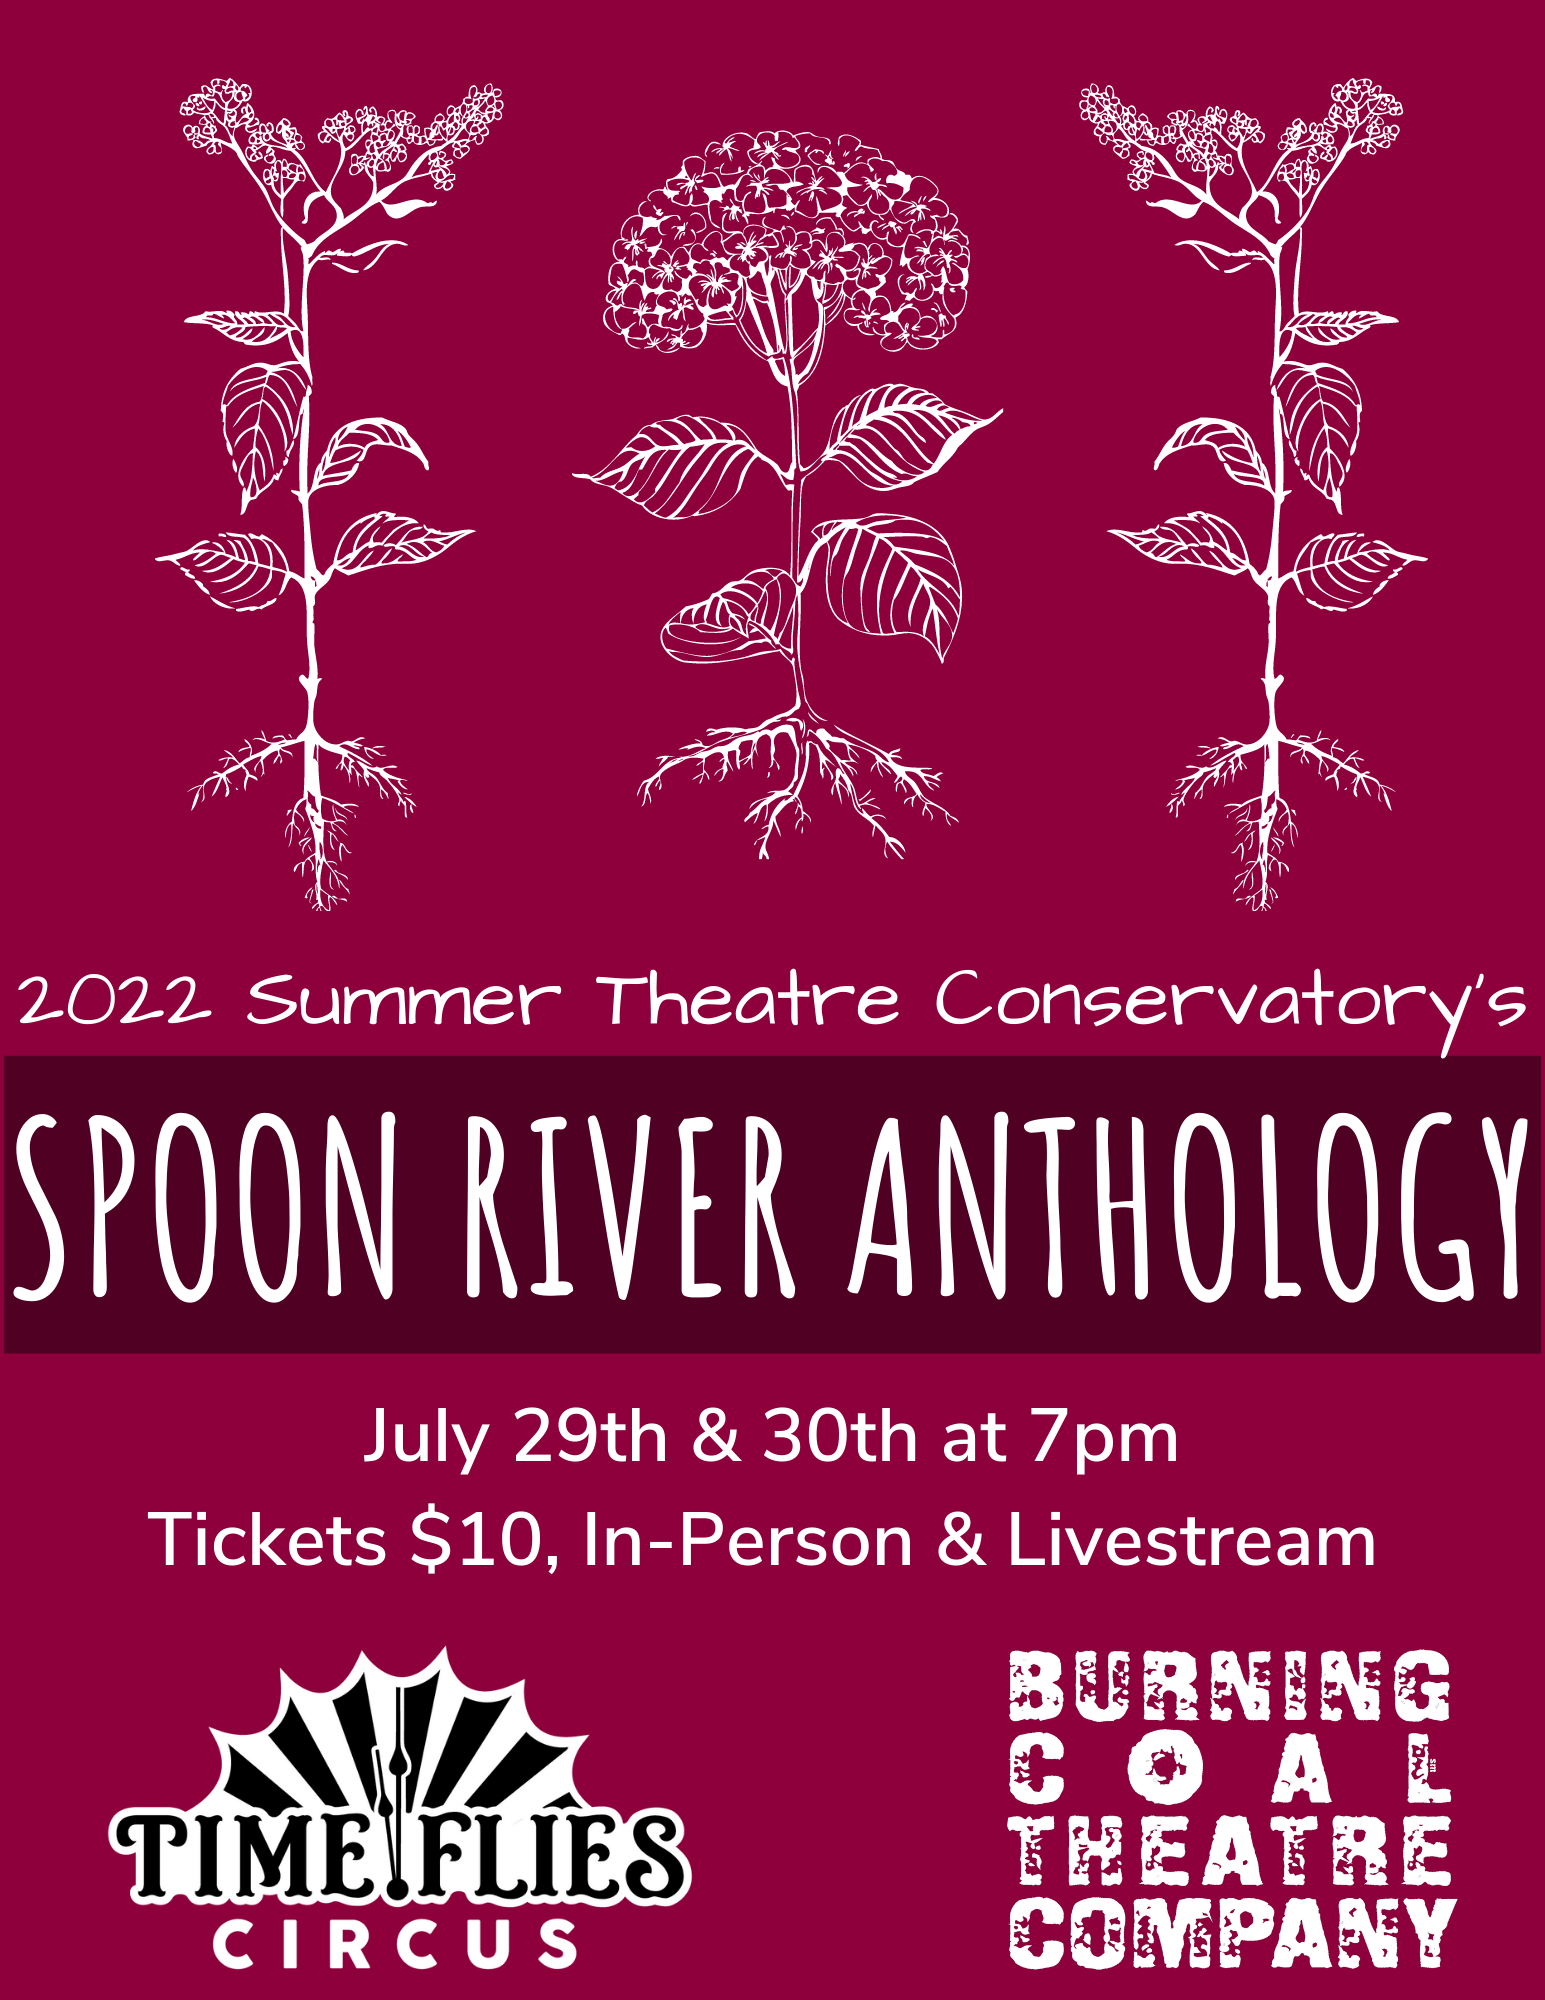 Spoon River Anthology poster with link to purchase tickets